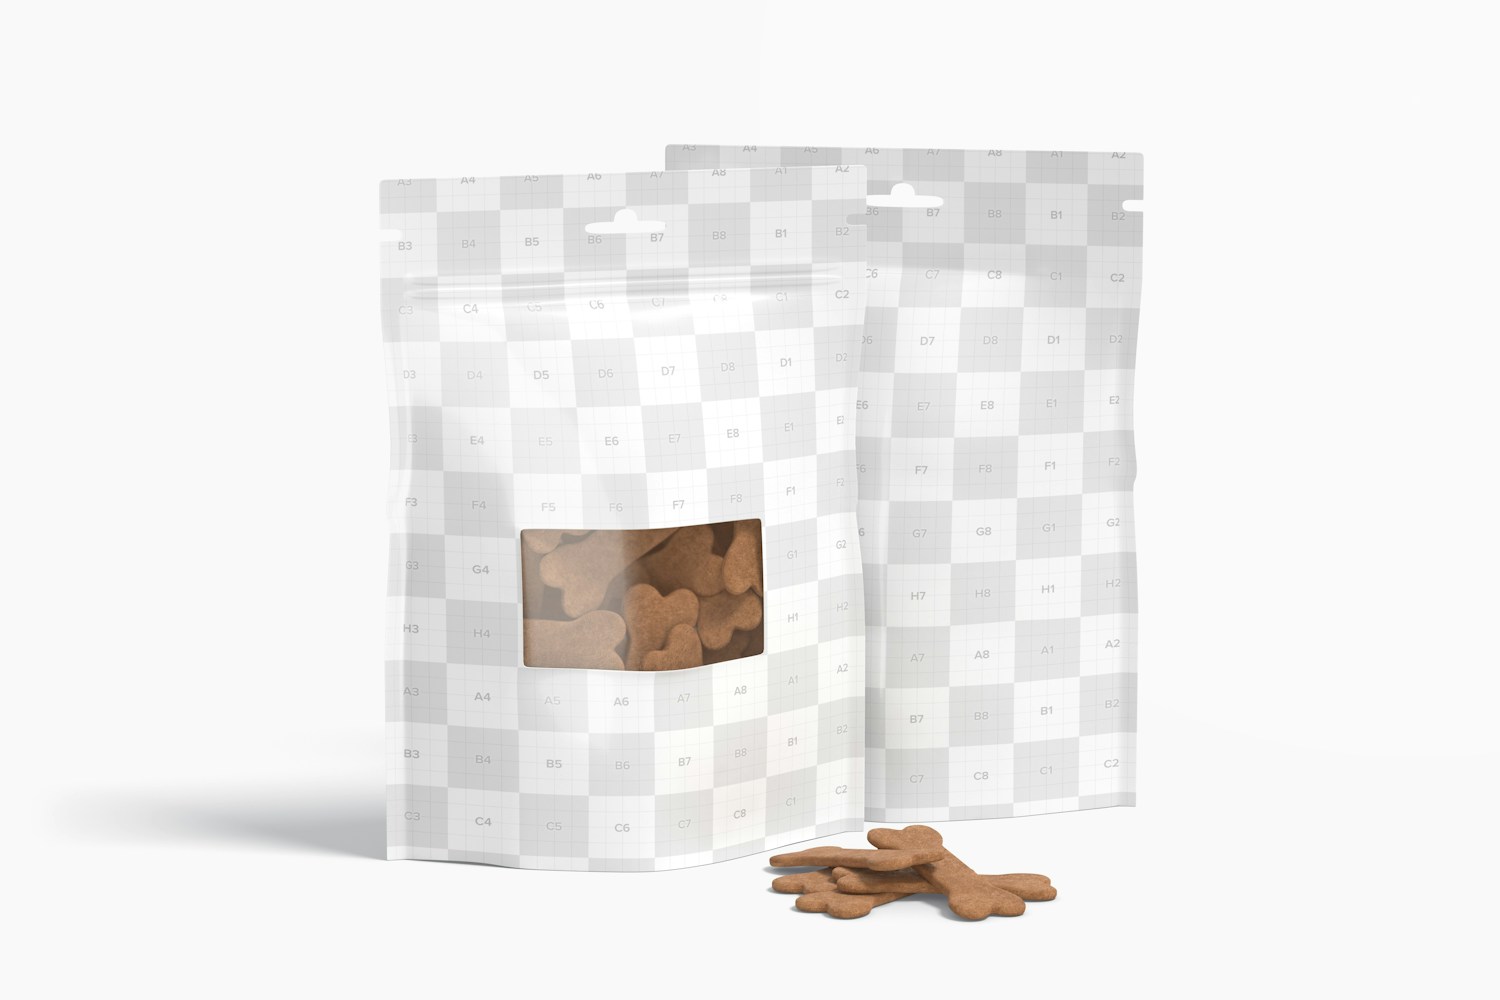 Dog Treat Packaging Mockup, Front and Back View